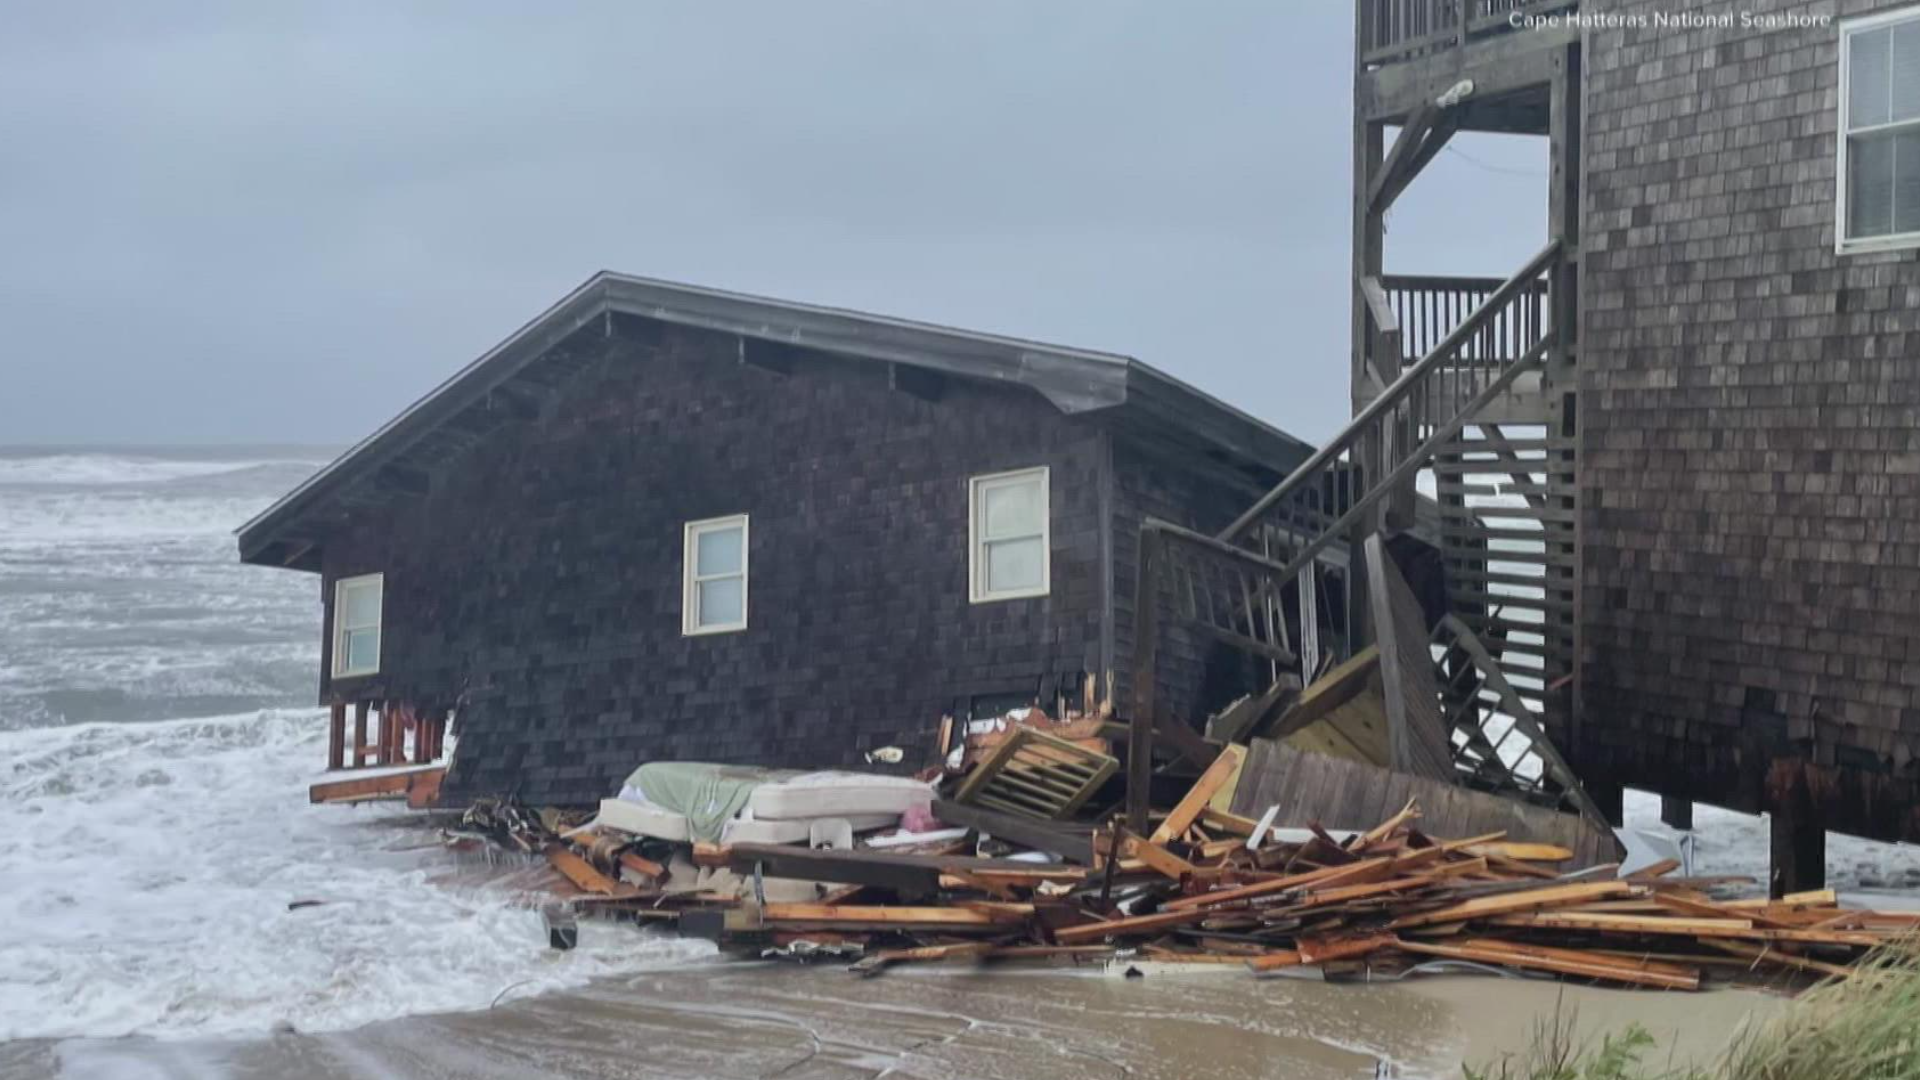 Officials with Cape Hatteras National Seashore said an oceanfront house in Rodanthe, North Carolina, collapsed.